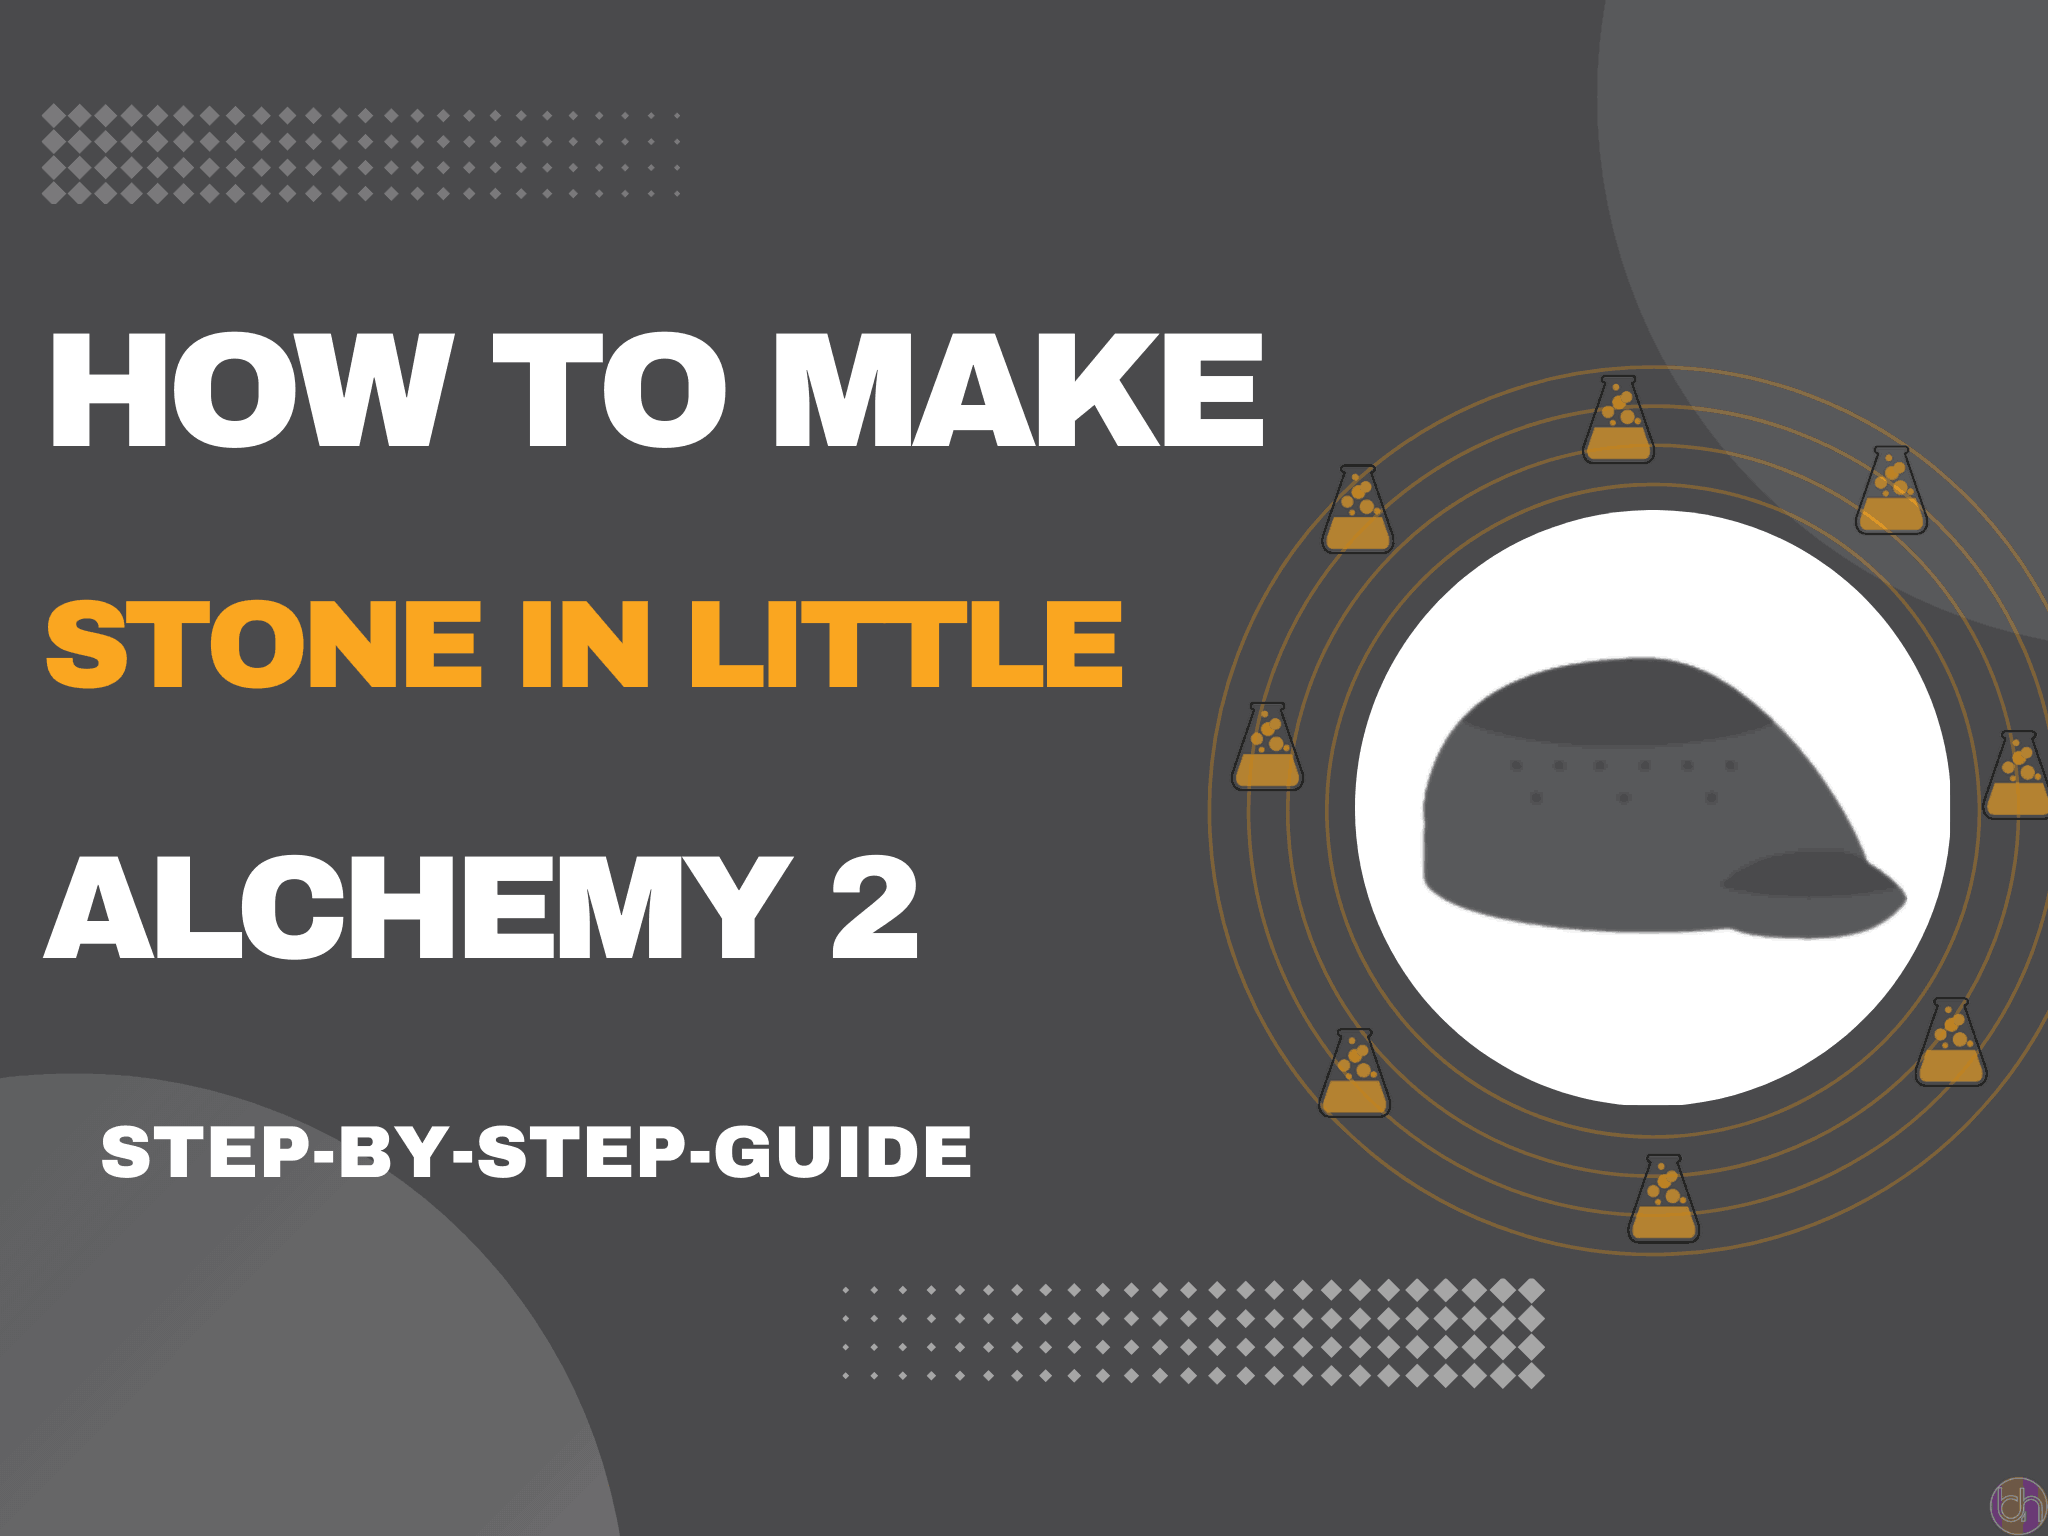 How to make Stone in Little Alchemy 2